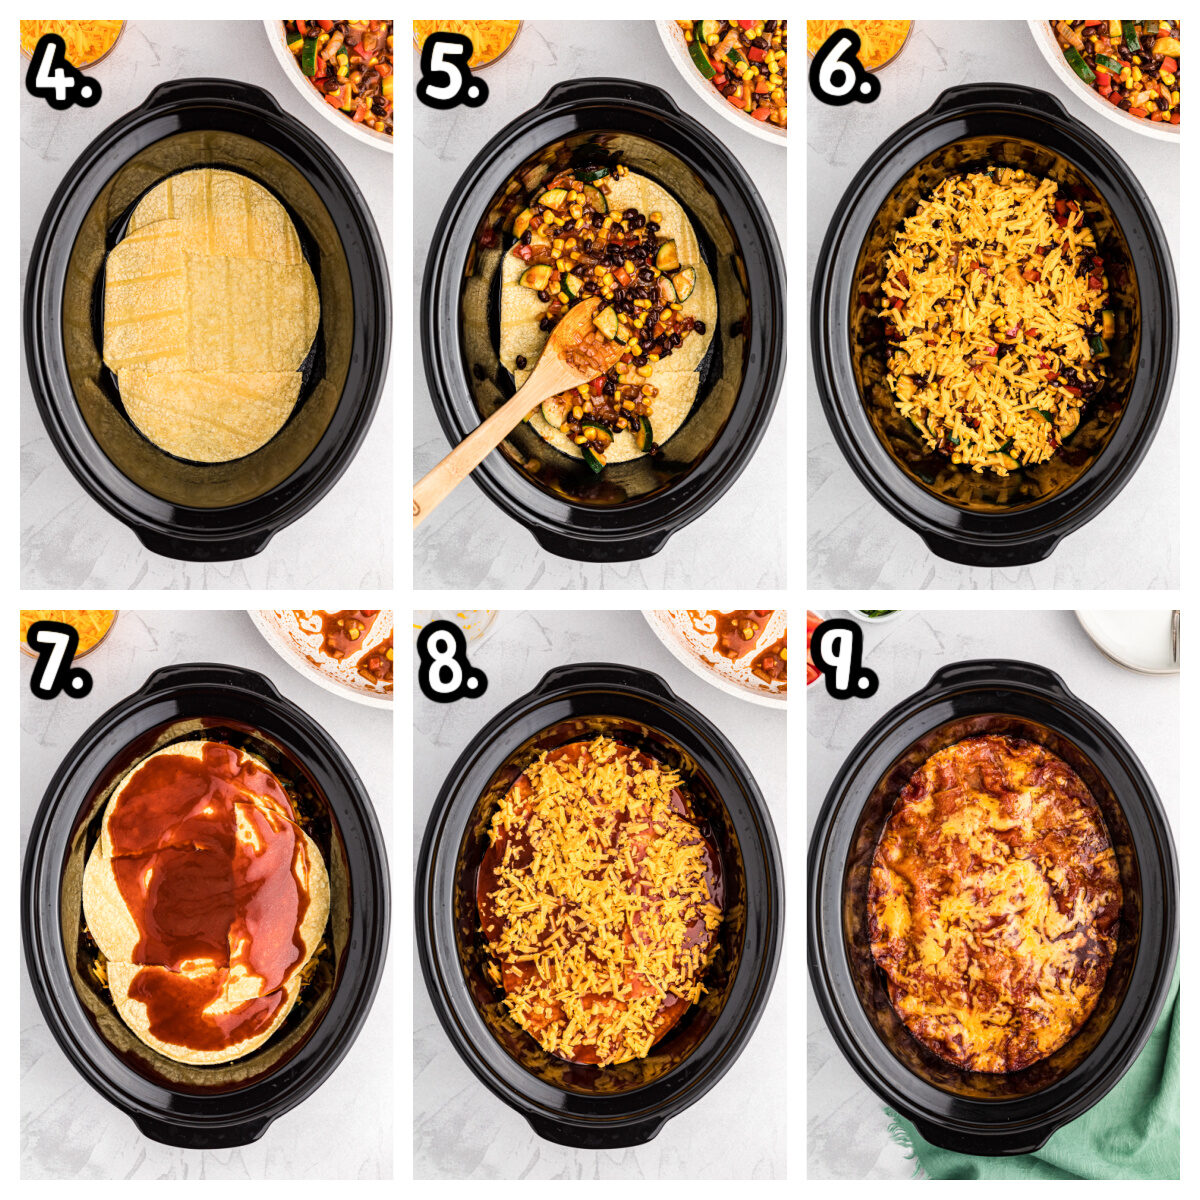 Six images showing how to make veggie enchilada casserole in a crockpot.